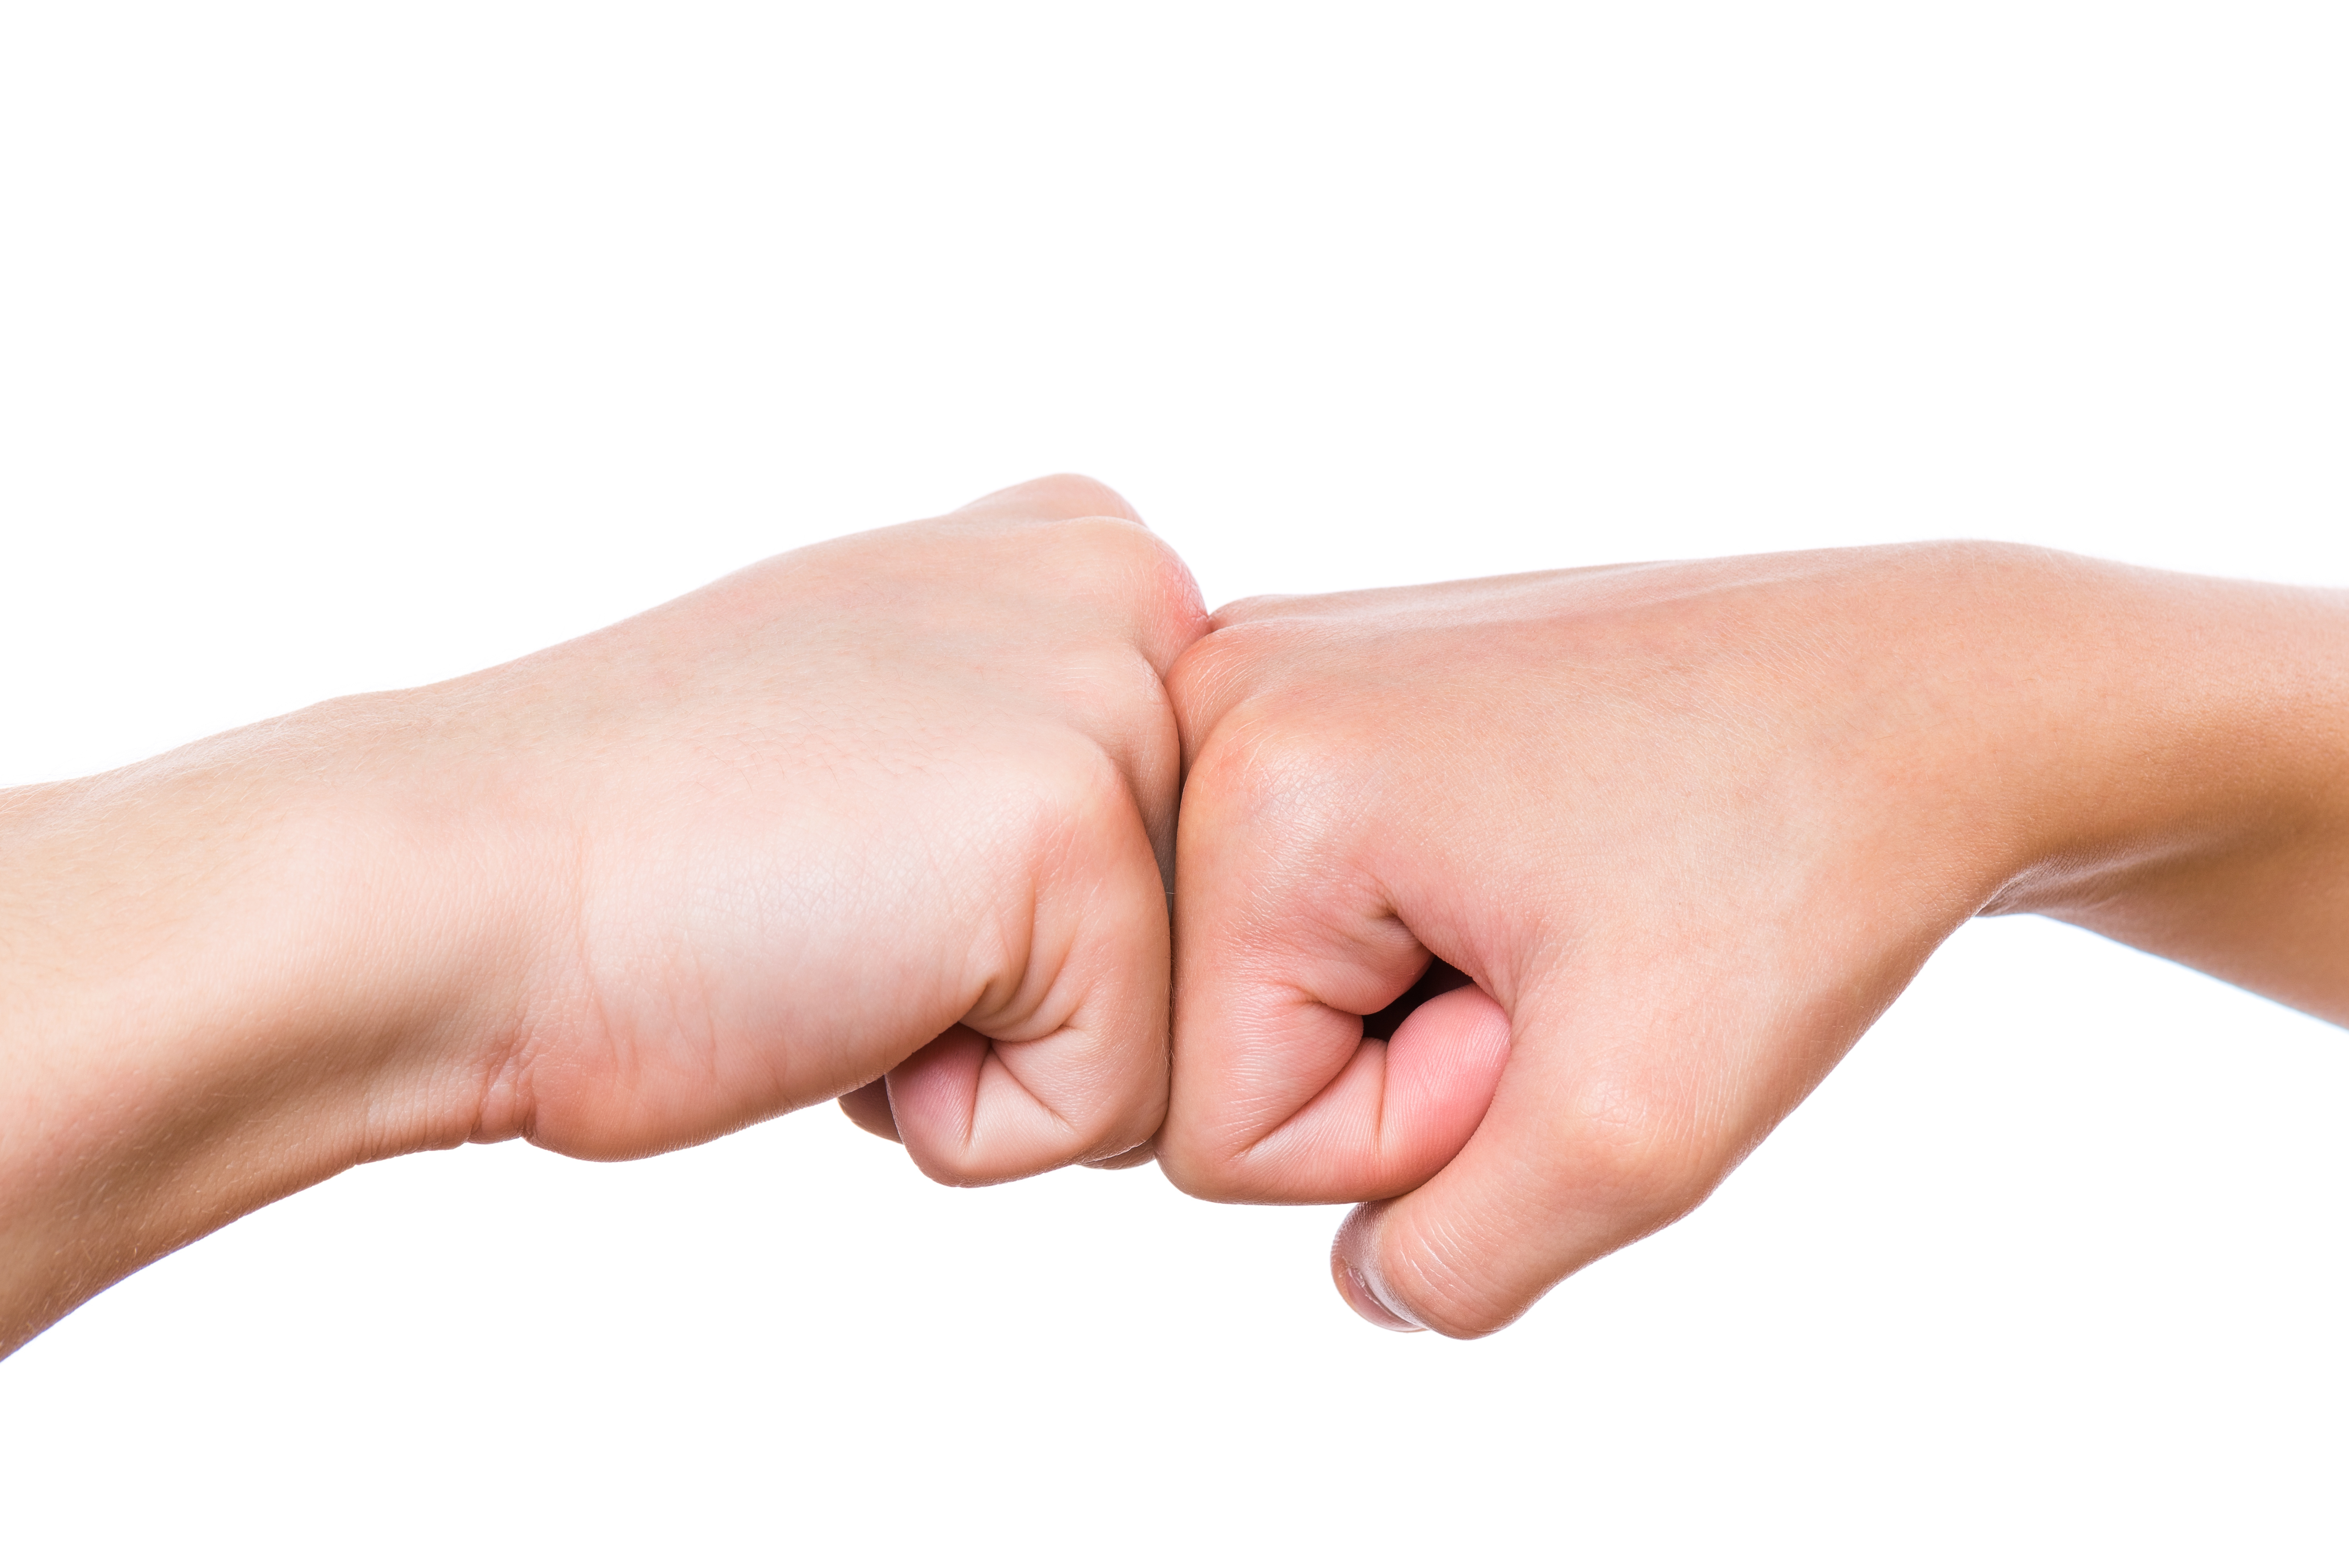 Close-up hands of boy and girl are banging their fists. Fist bump isolated on white background.